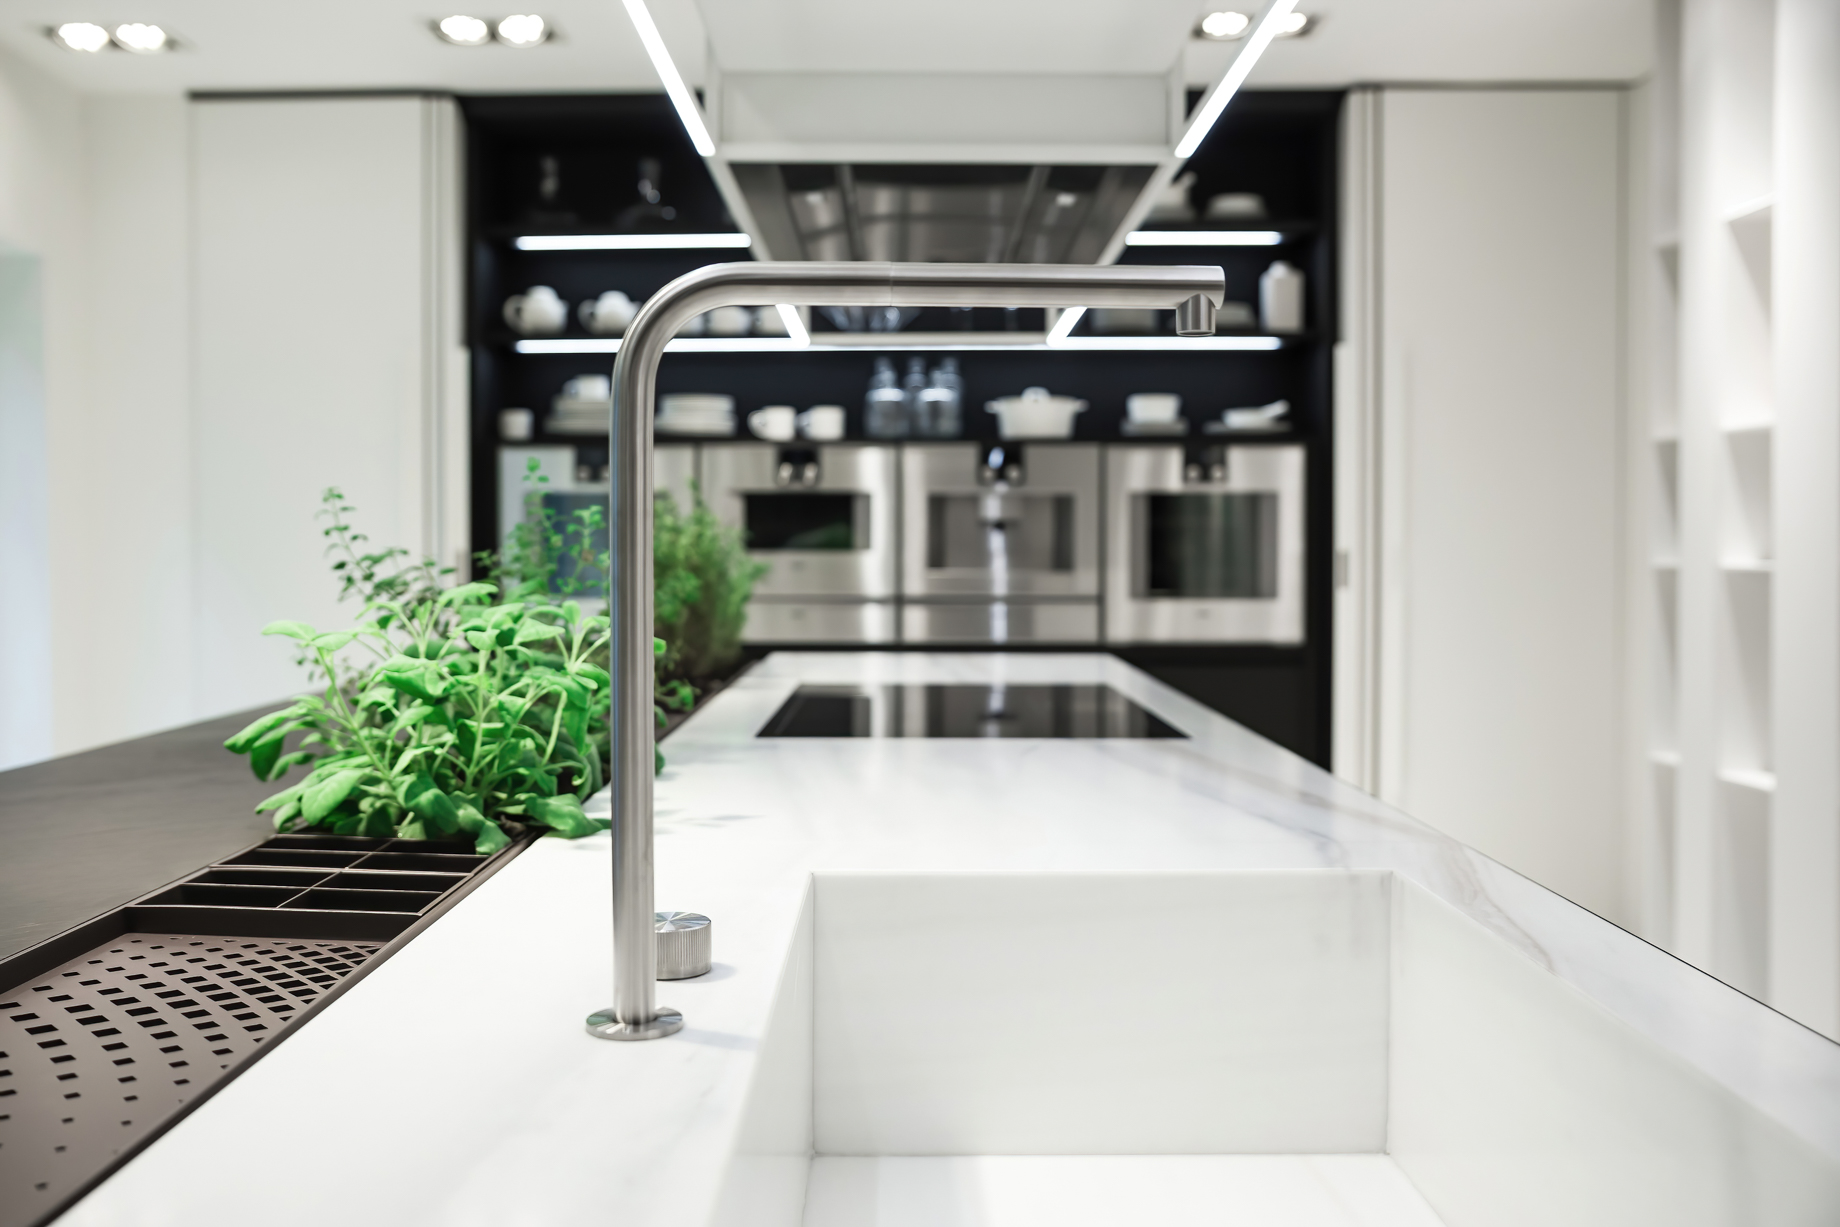 EGO Kitchen The Cut by Record è Cucine Milan, Italy – Alessandro Isola